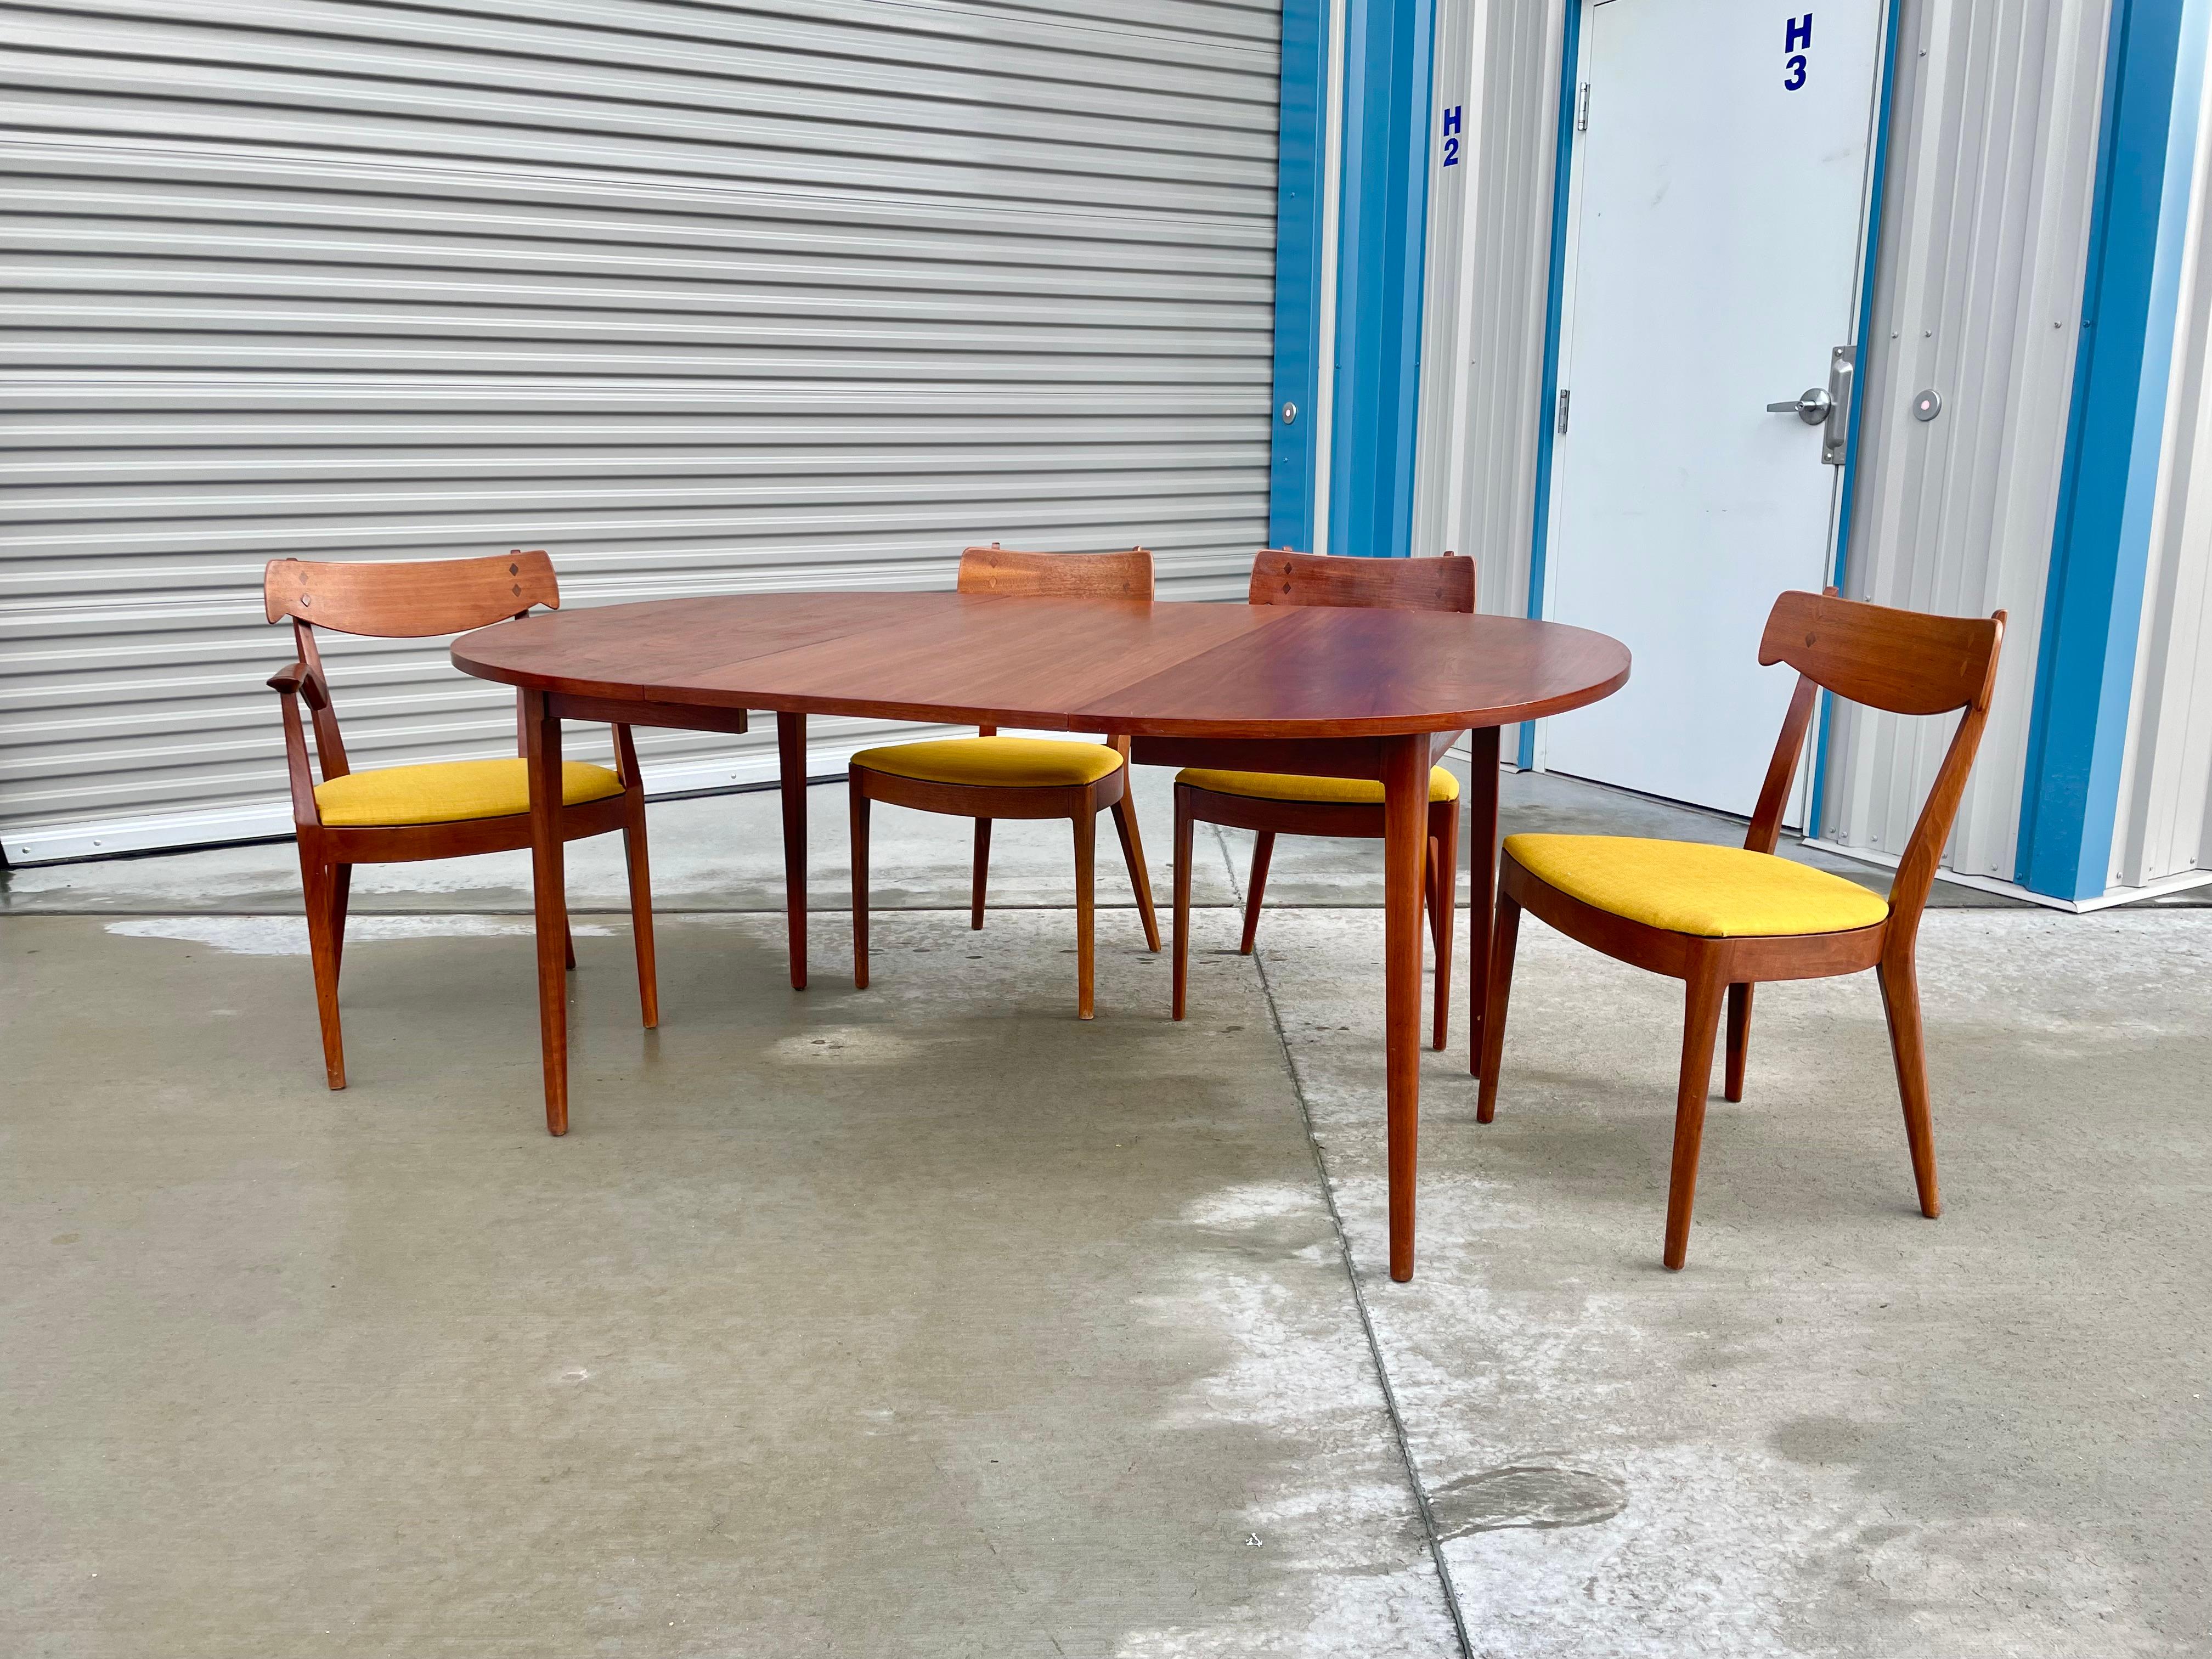 1950s dining table and chairs